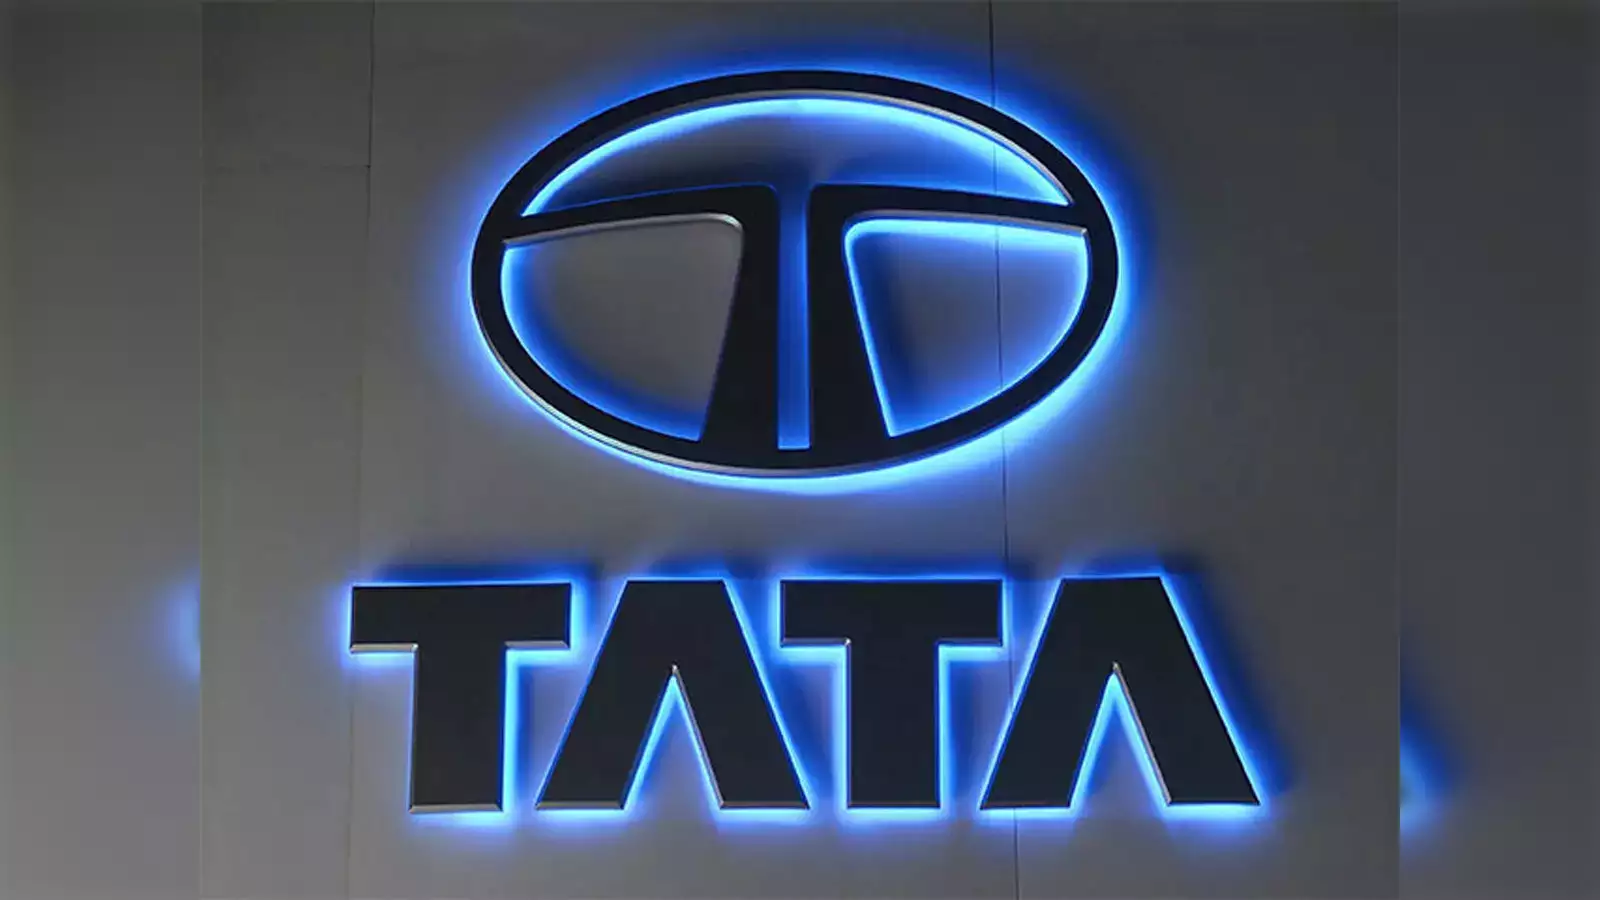 Here’s why the price of Tata Investment shares jumps by 20% to an all-time high.